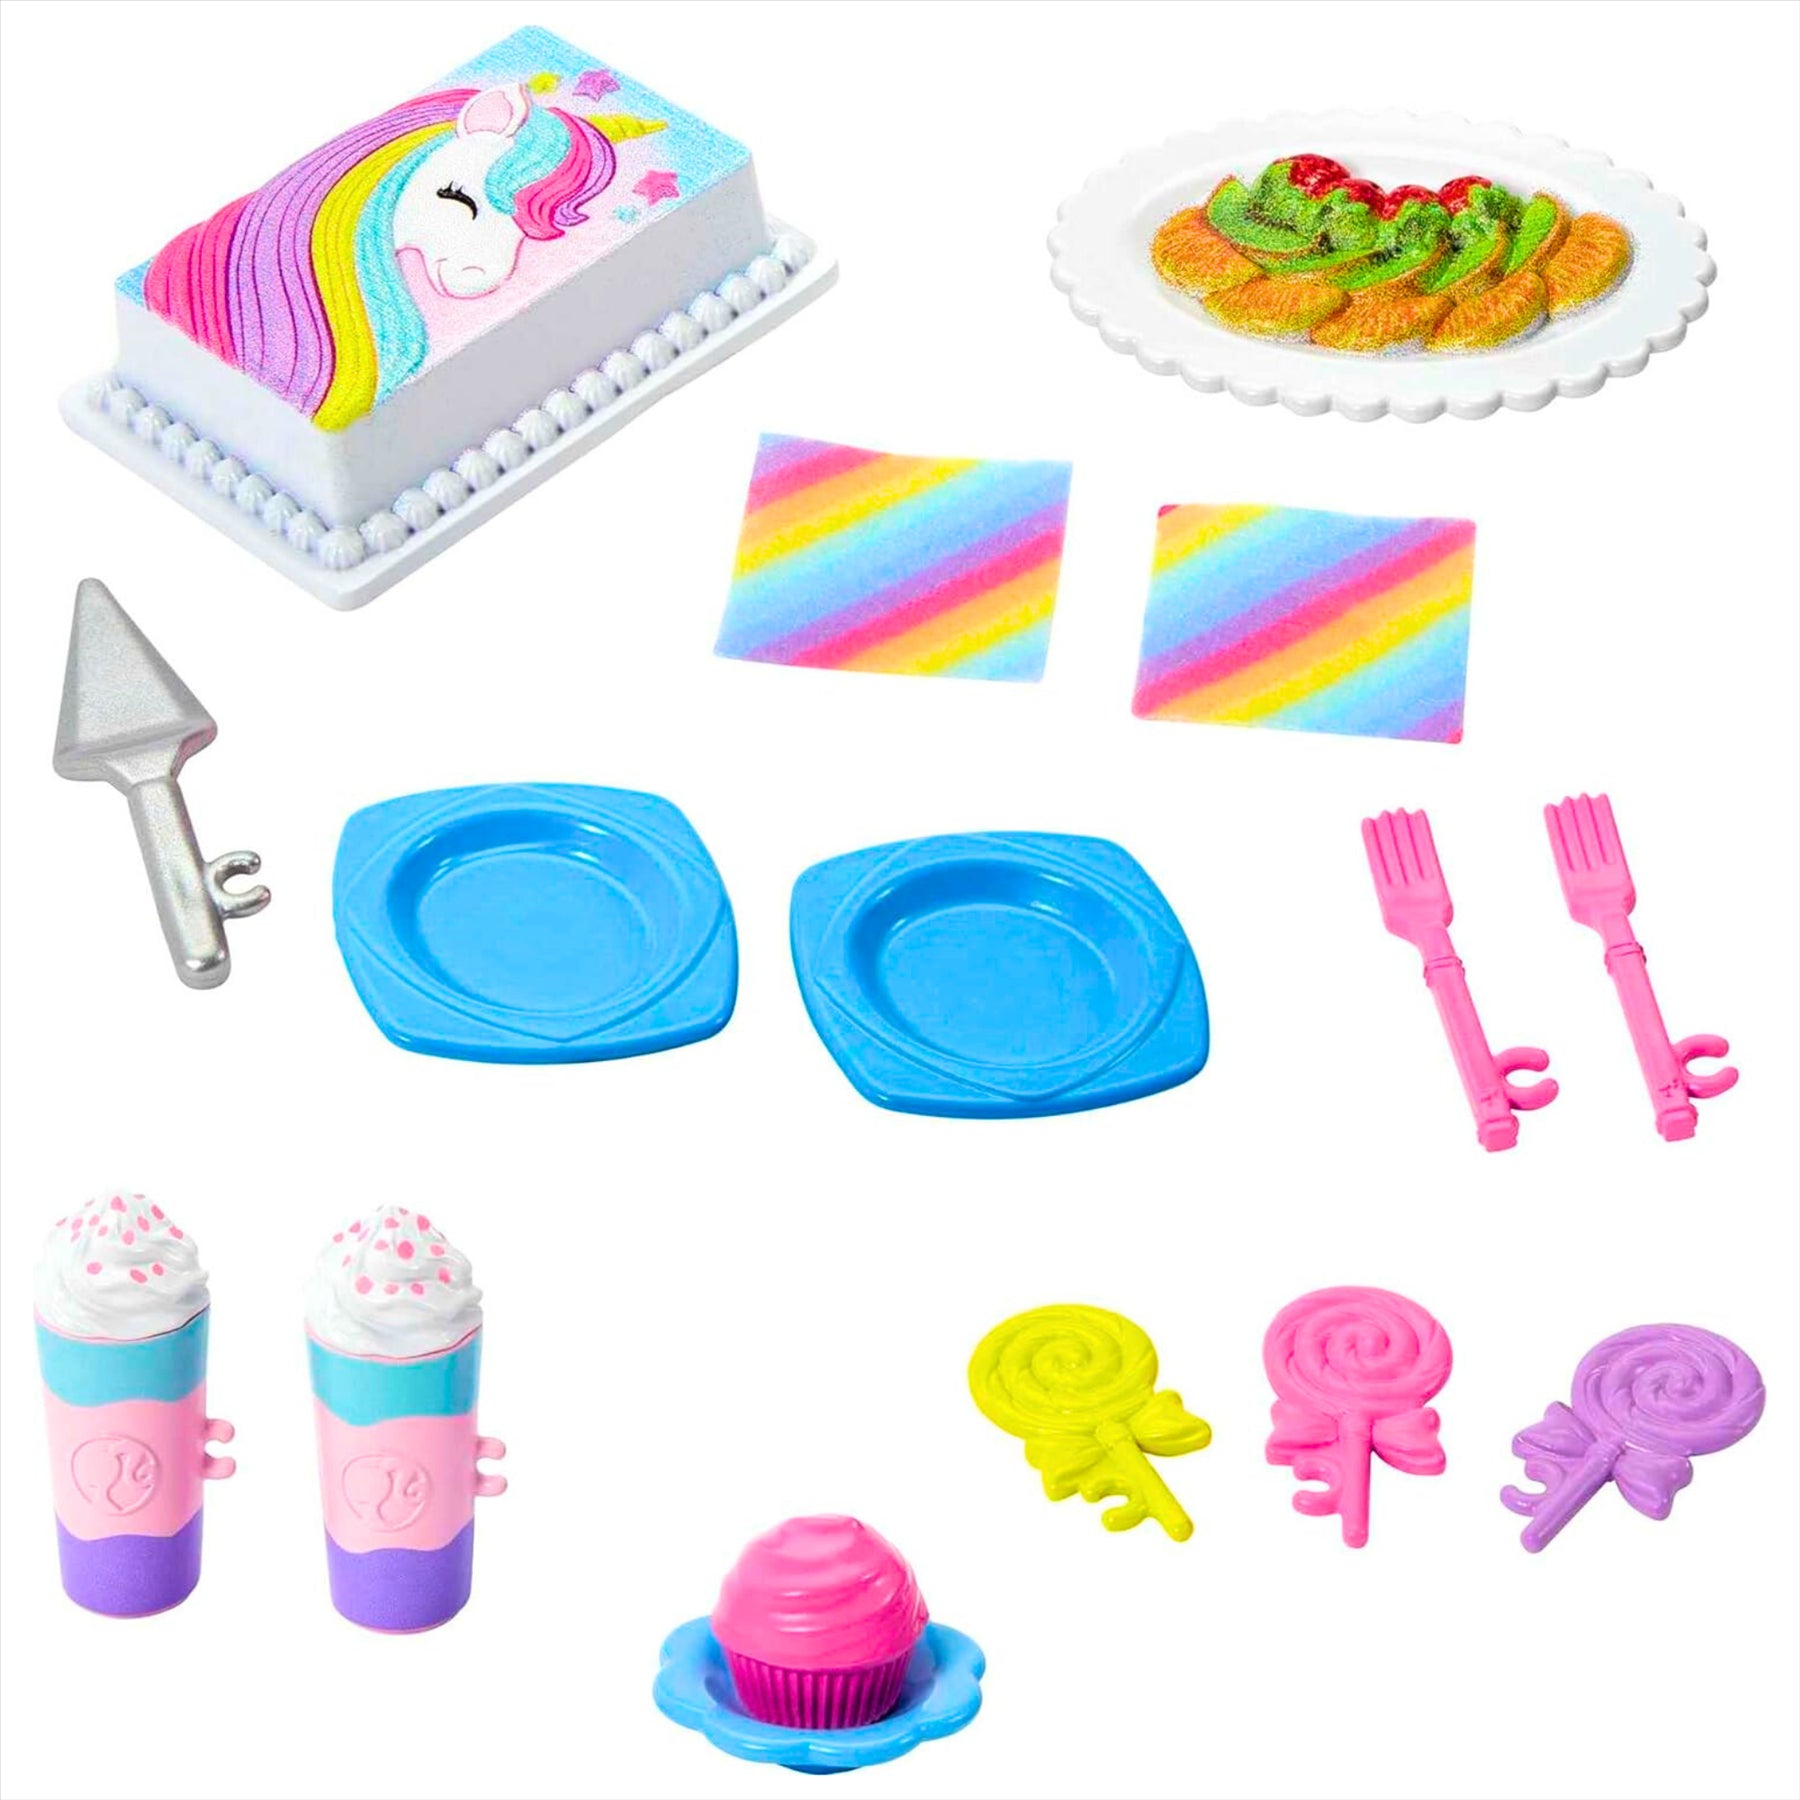 Barbie 15 Piece Doll and House Accessory Set with Cake and Plates - Toptoys2u